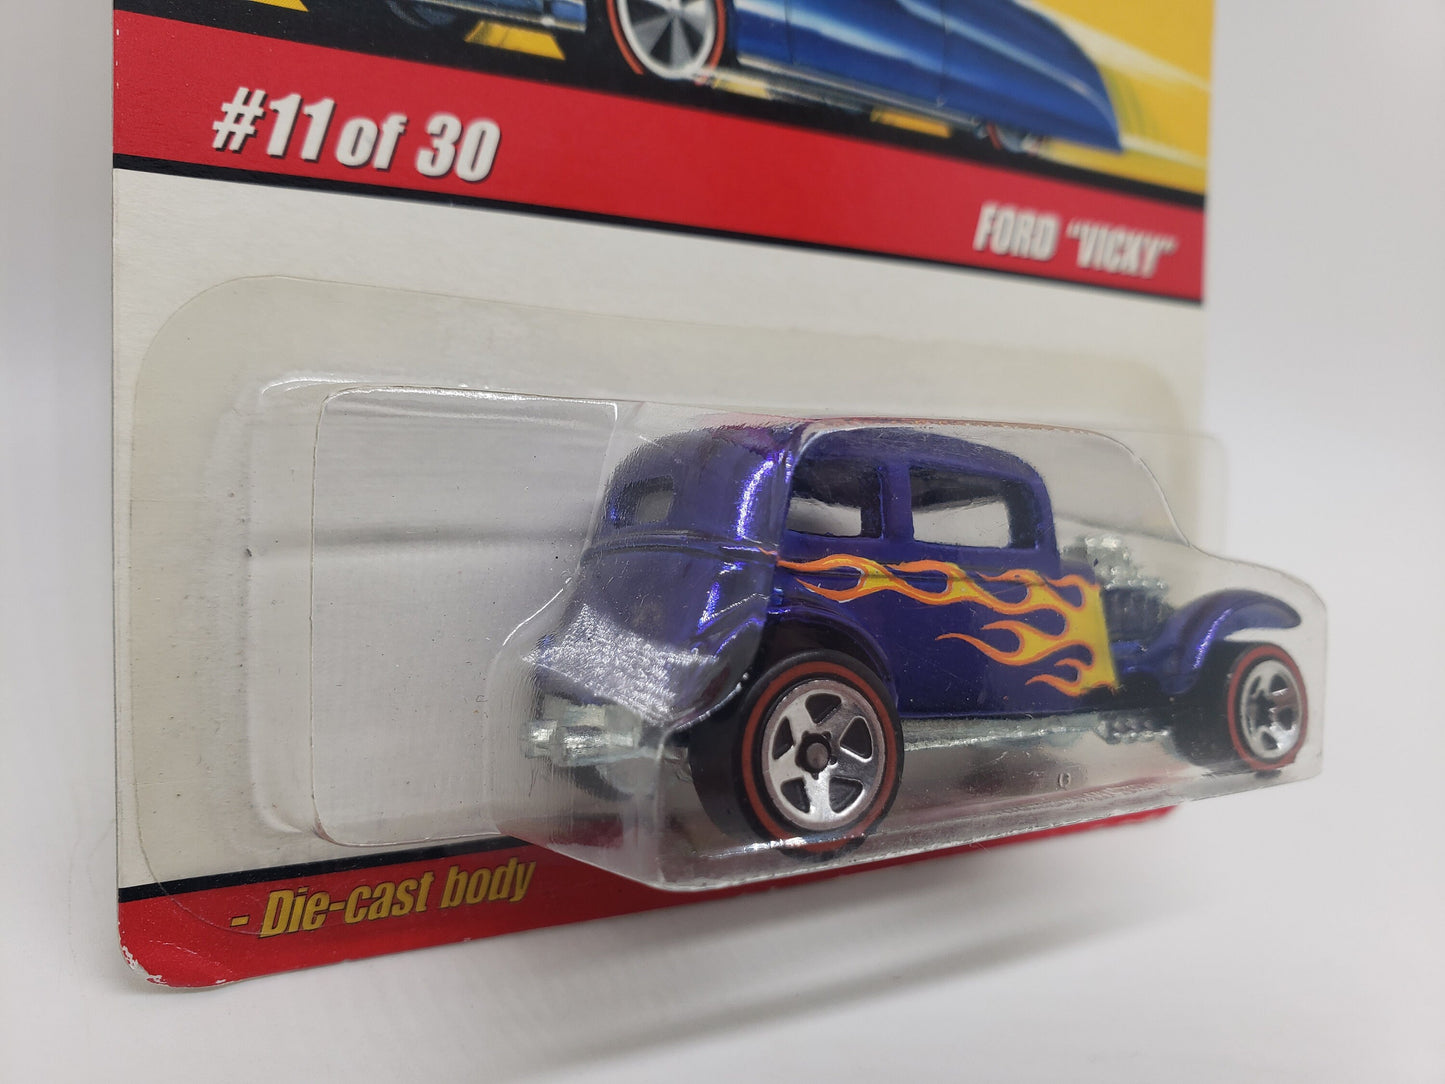 Hot Wheels Ford Vicky Purple Classics Series 3 Miniature Collectible Scale Model Toy Car Perfect Birthday Gift